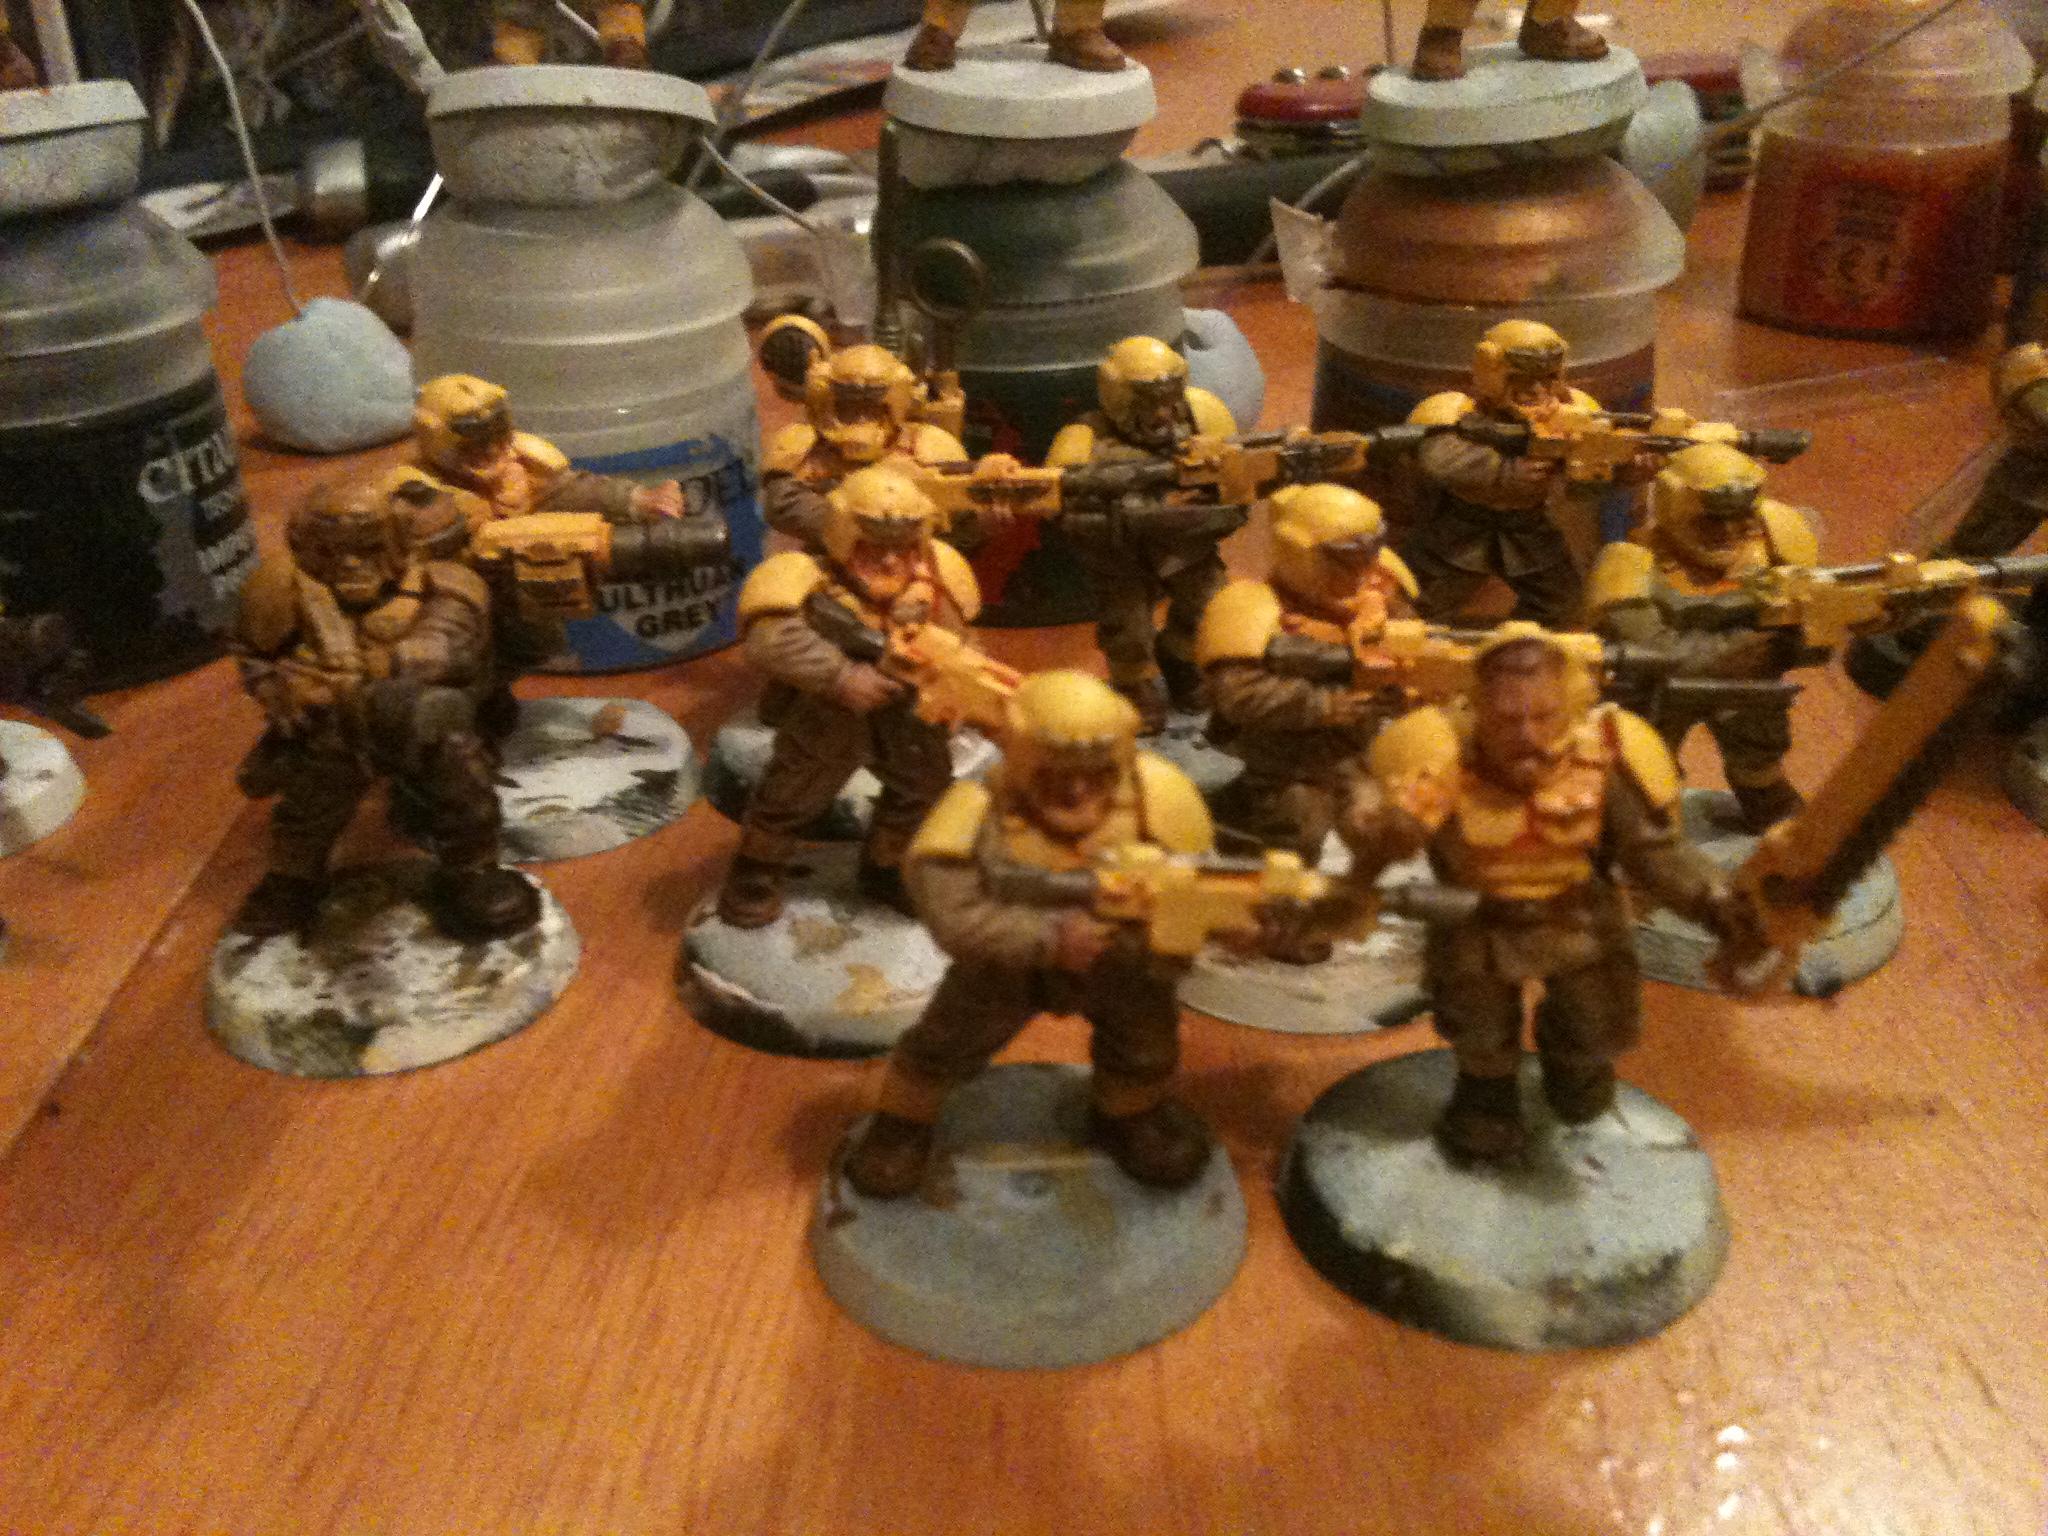 Cadians, Imperial Guard, Yellow